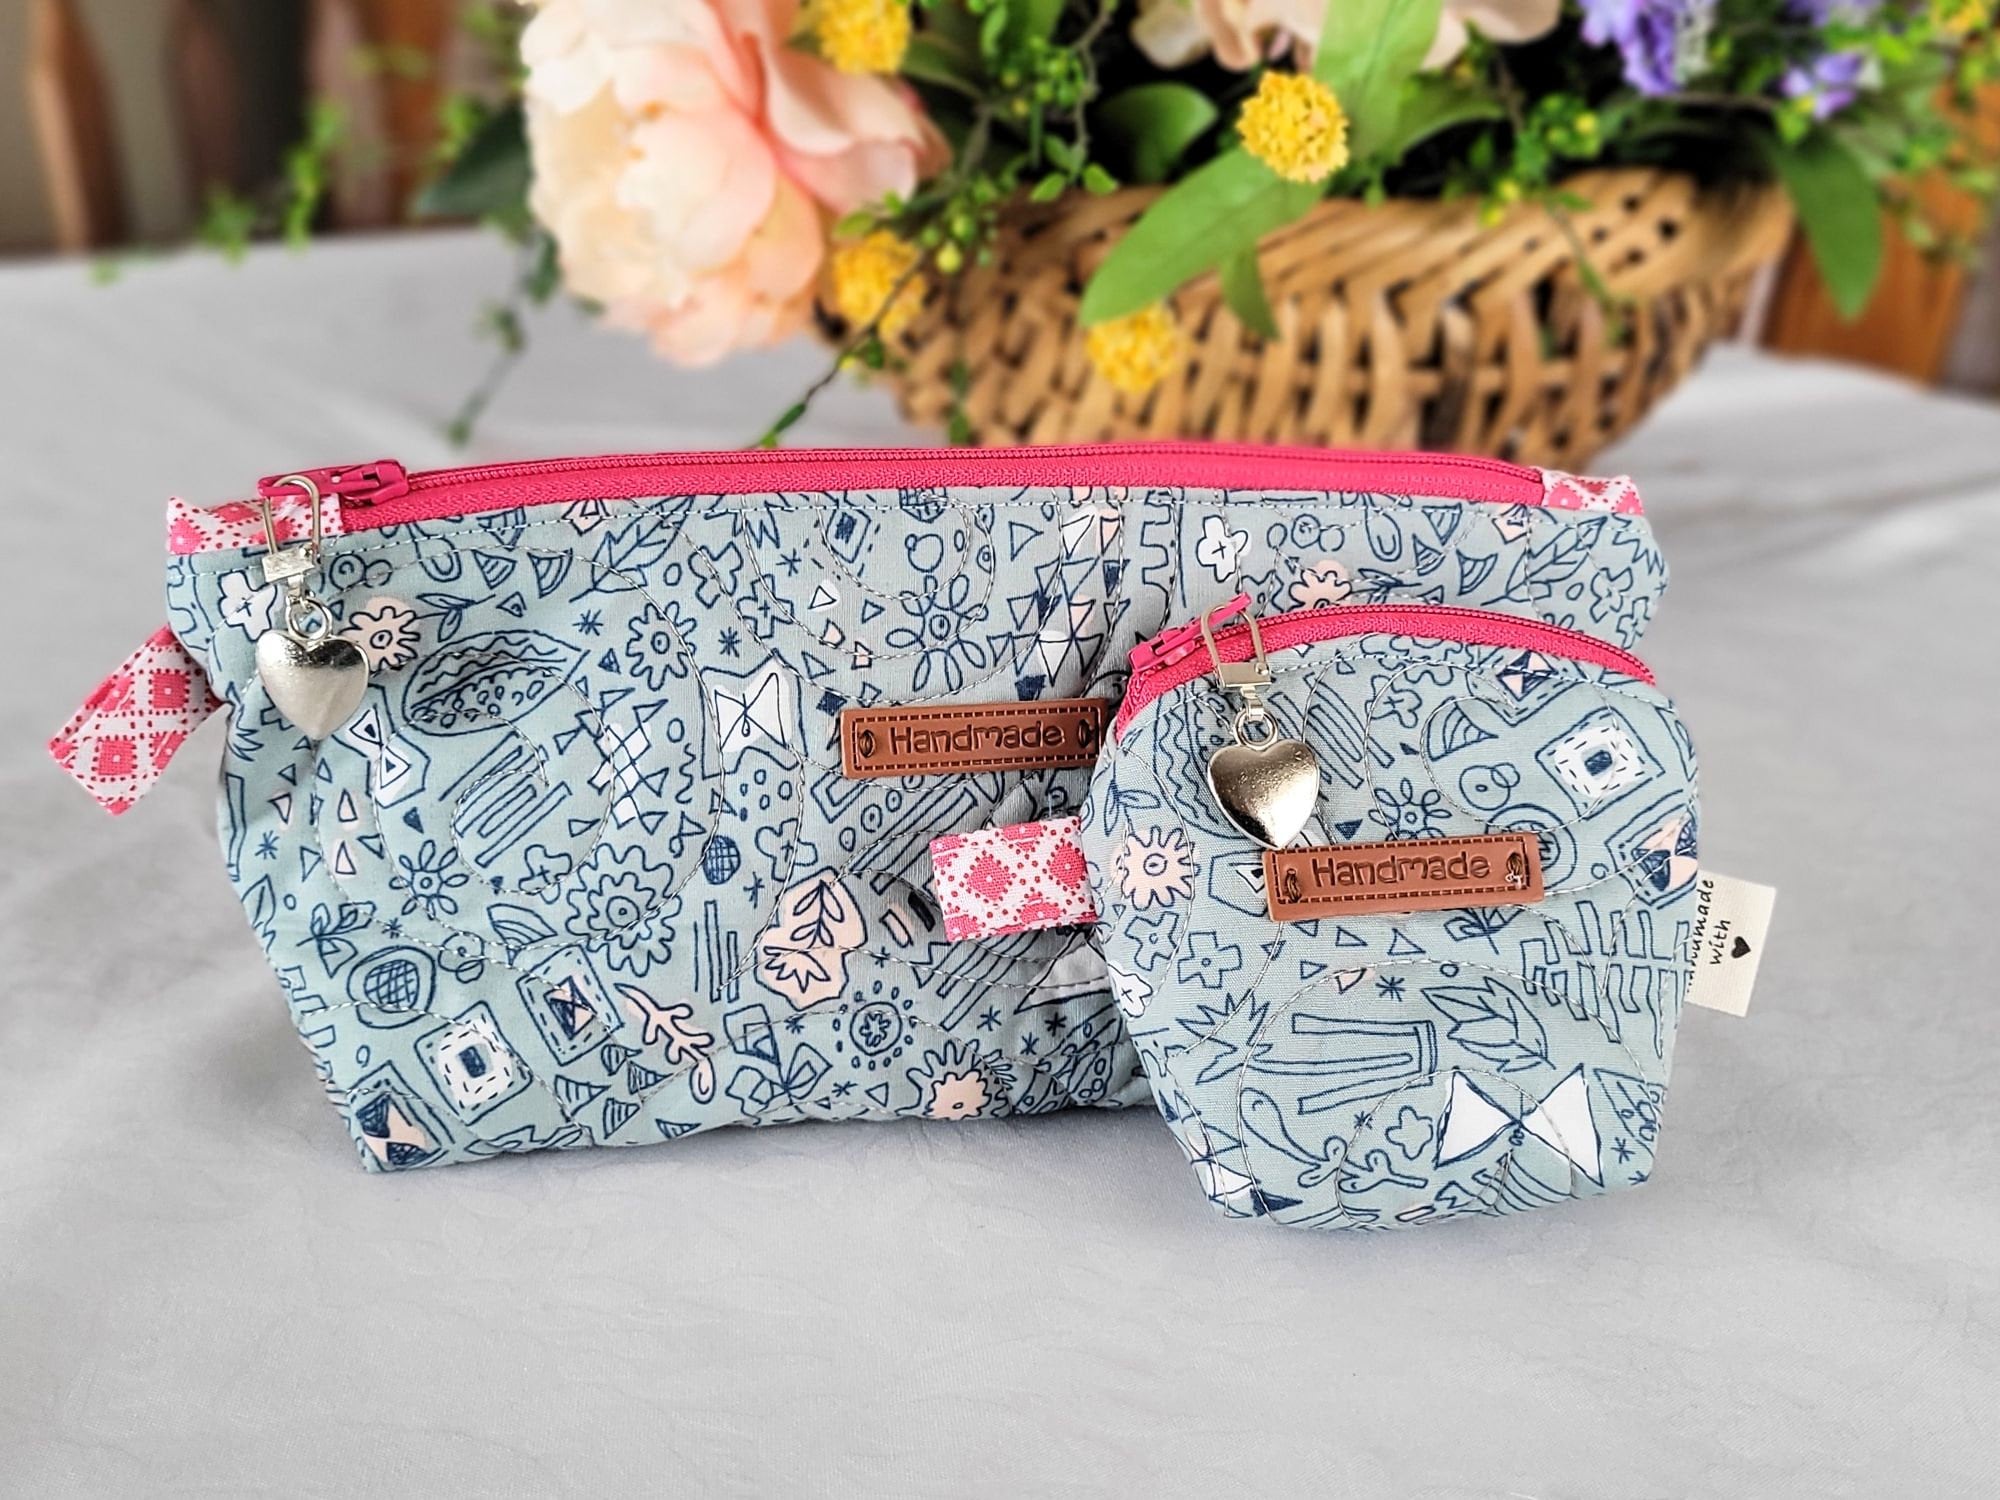 quilted bag set for make up and travel toiletries in modern doodle theme fabric